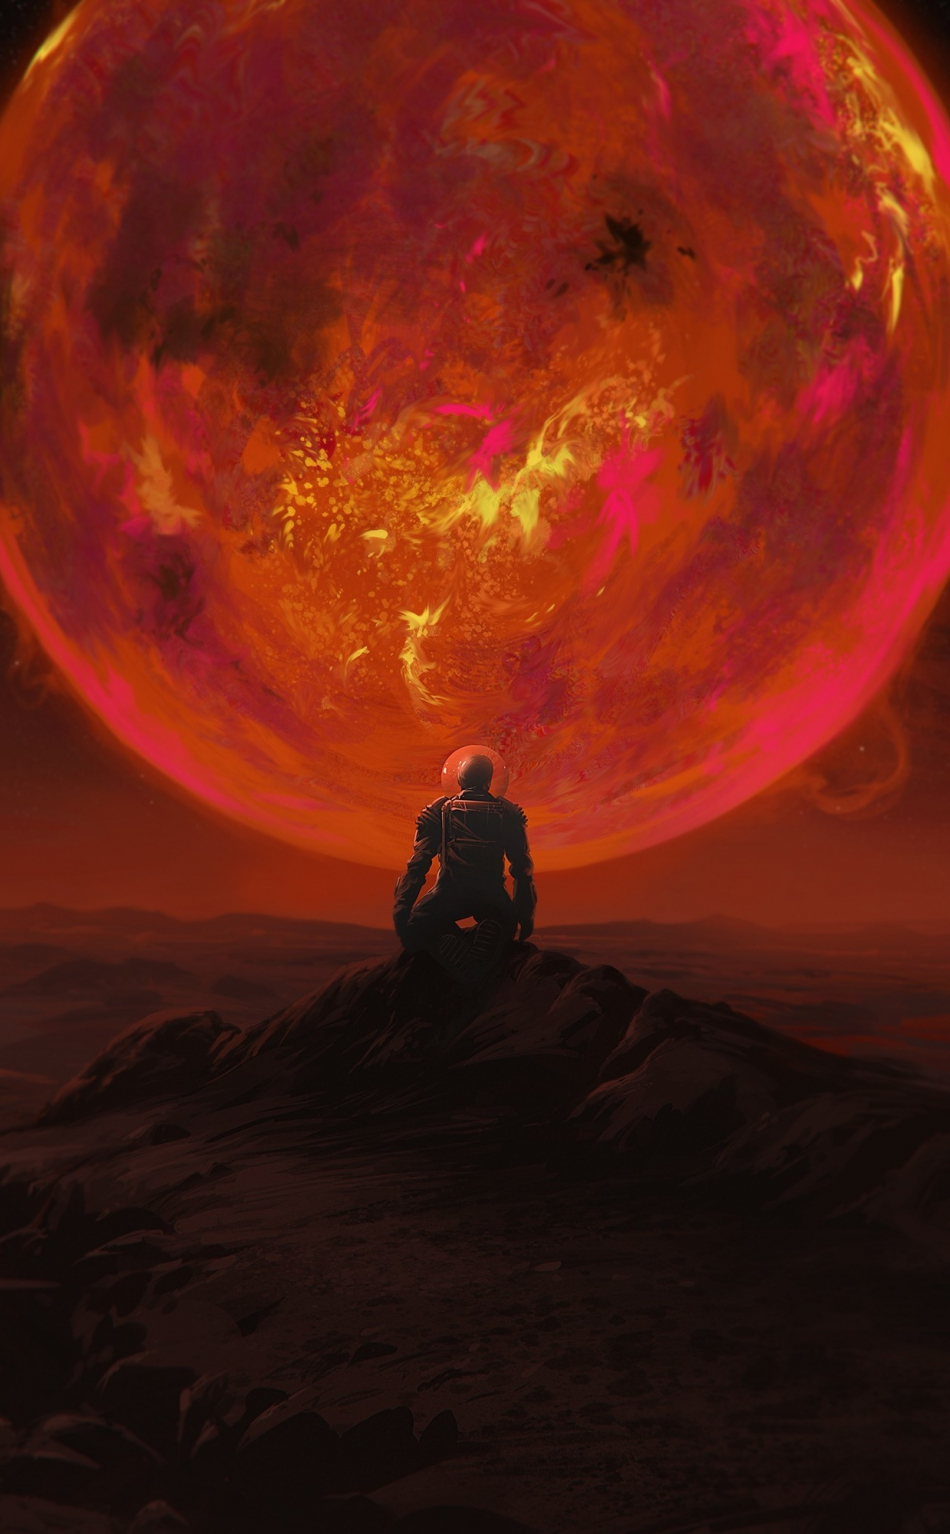 Download wallpaper 950x1534 red glowing planet, astronaut, iphone, 950x1534  hd background, 23974